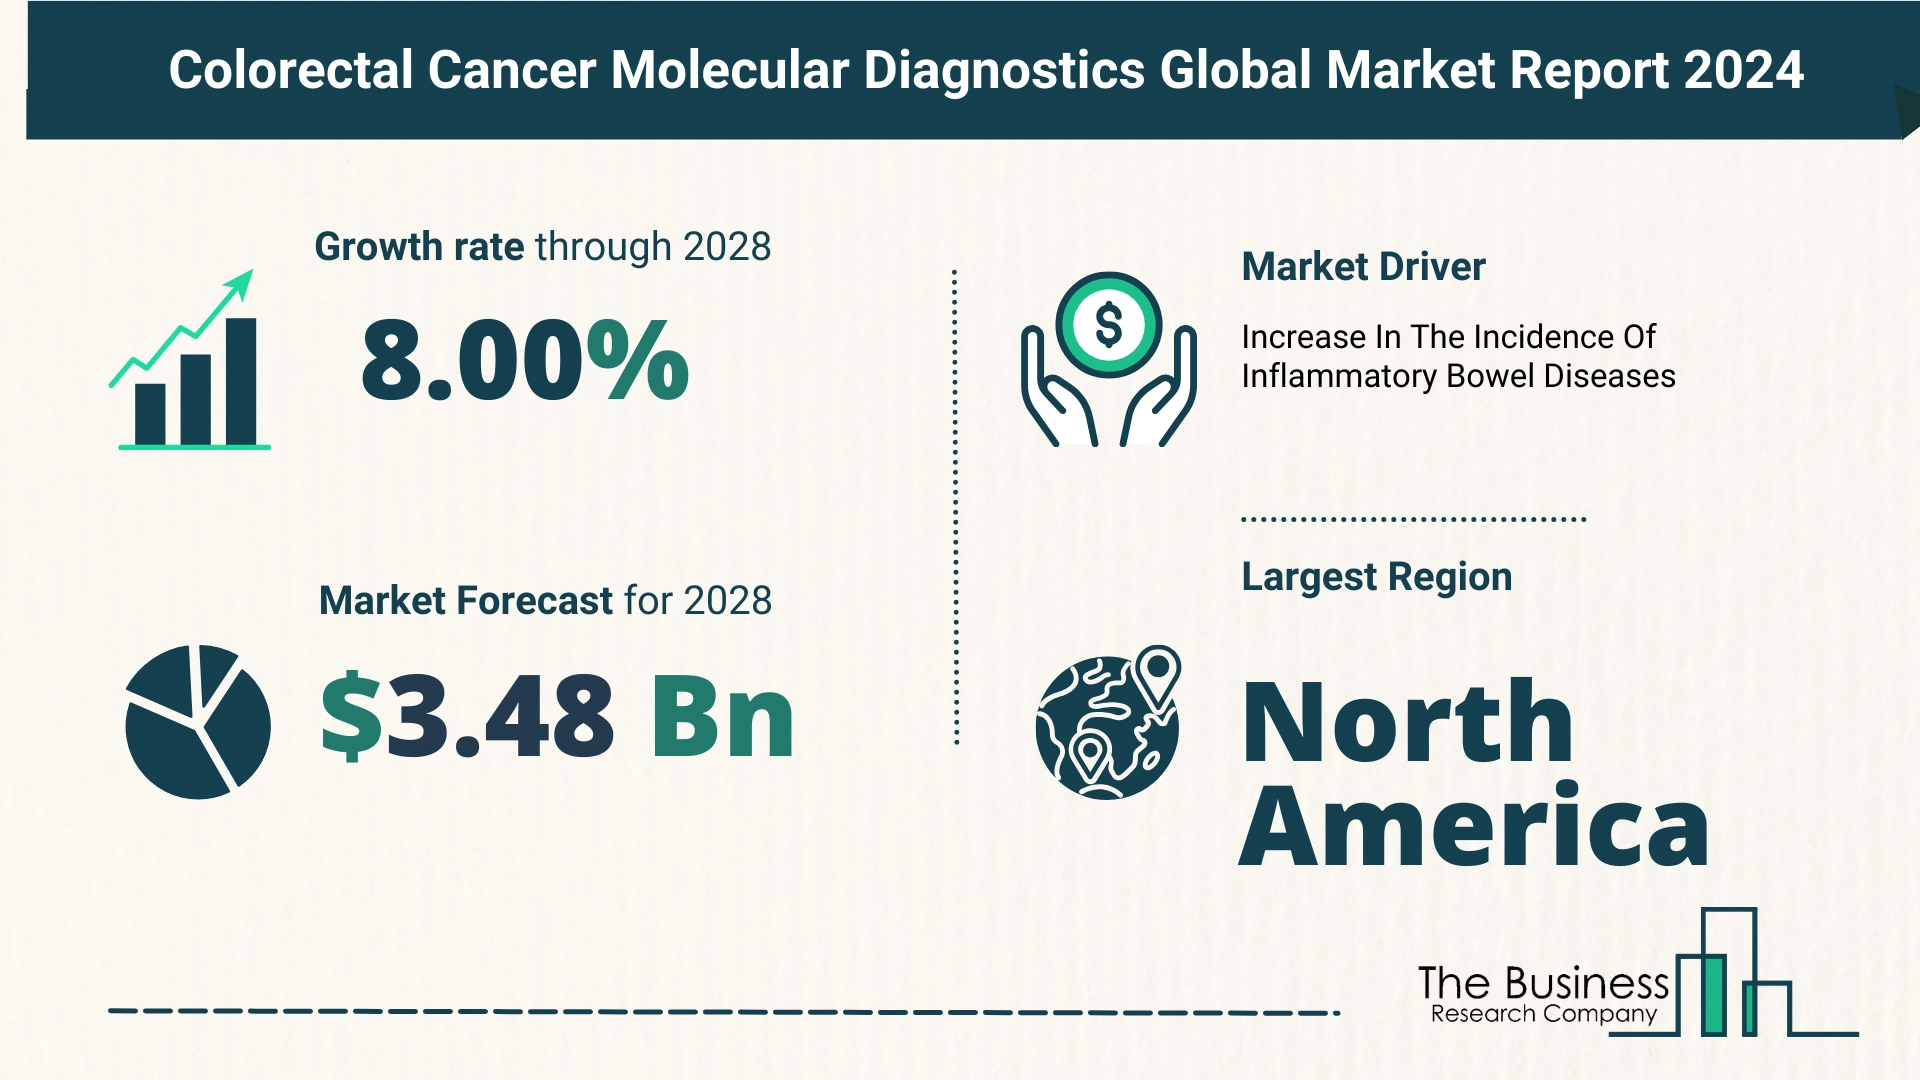 Top 5 Insights From The Colorectal Cancer Molecular Diagnostics Market Report 2024